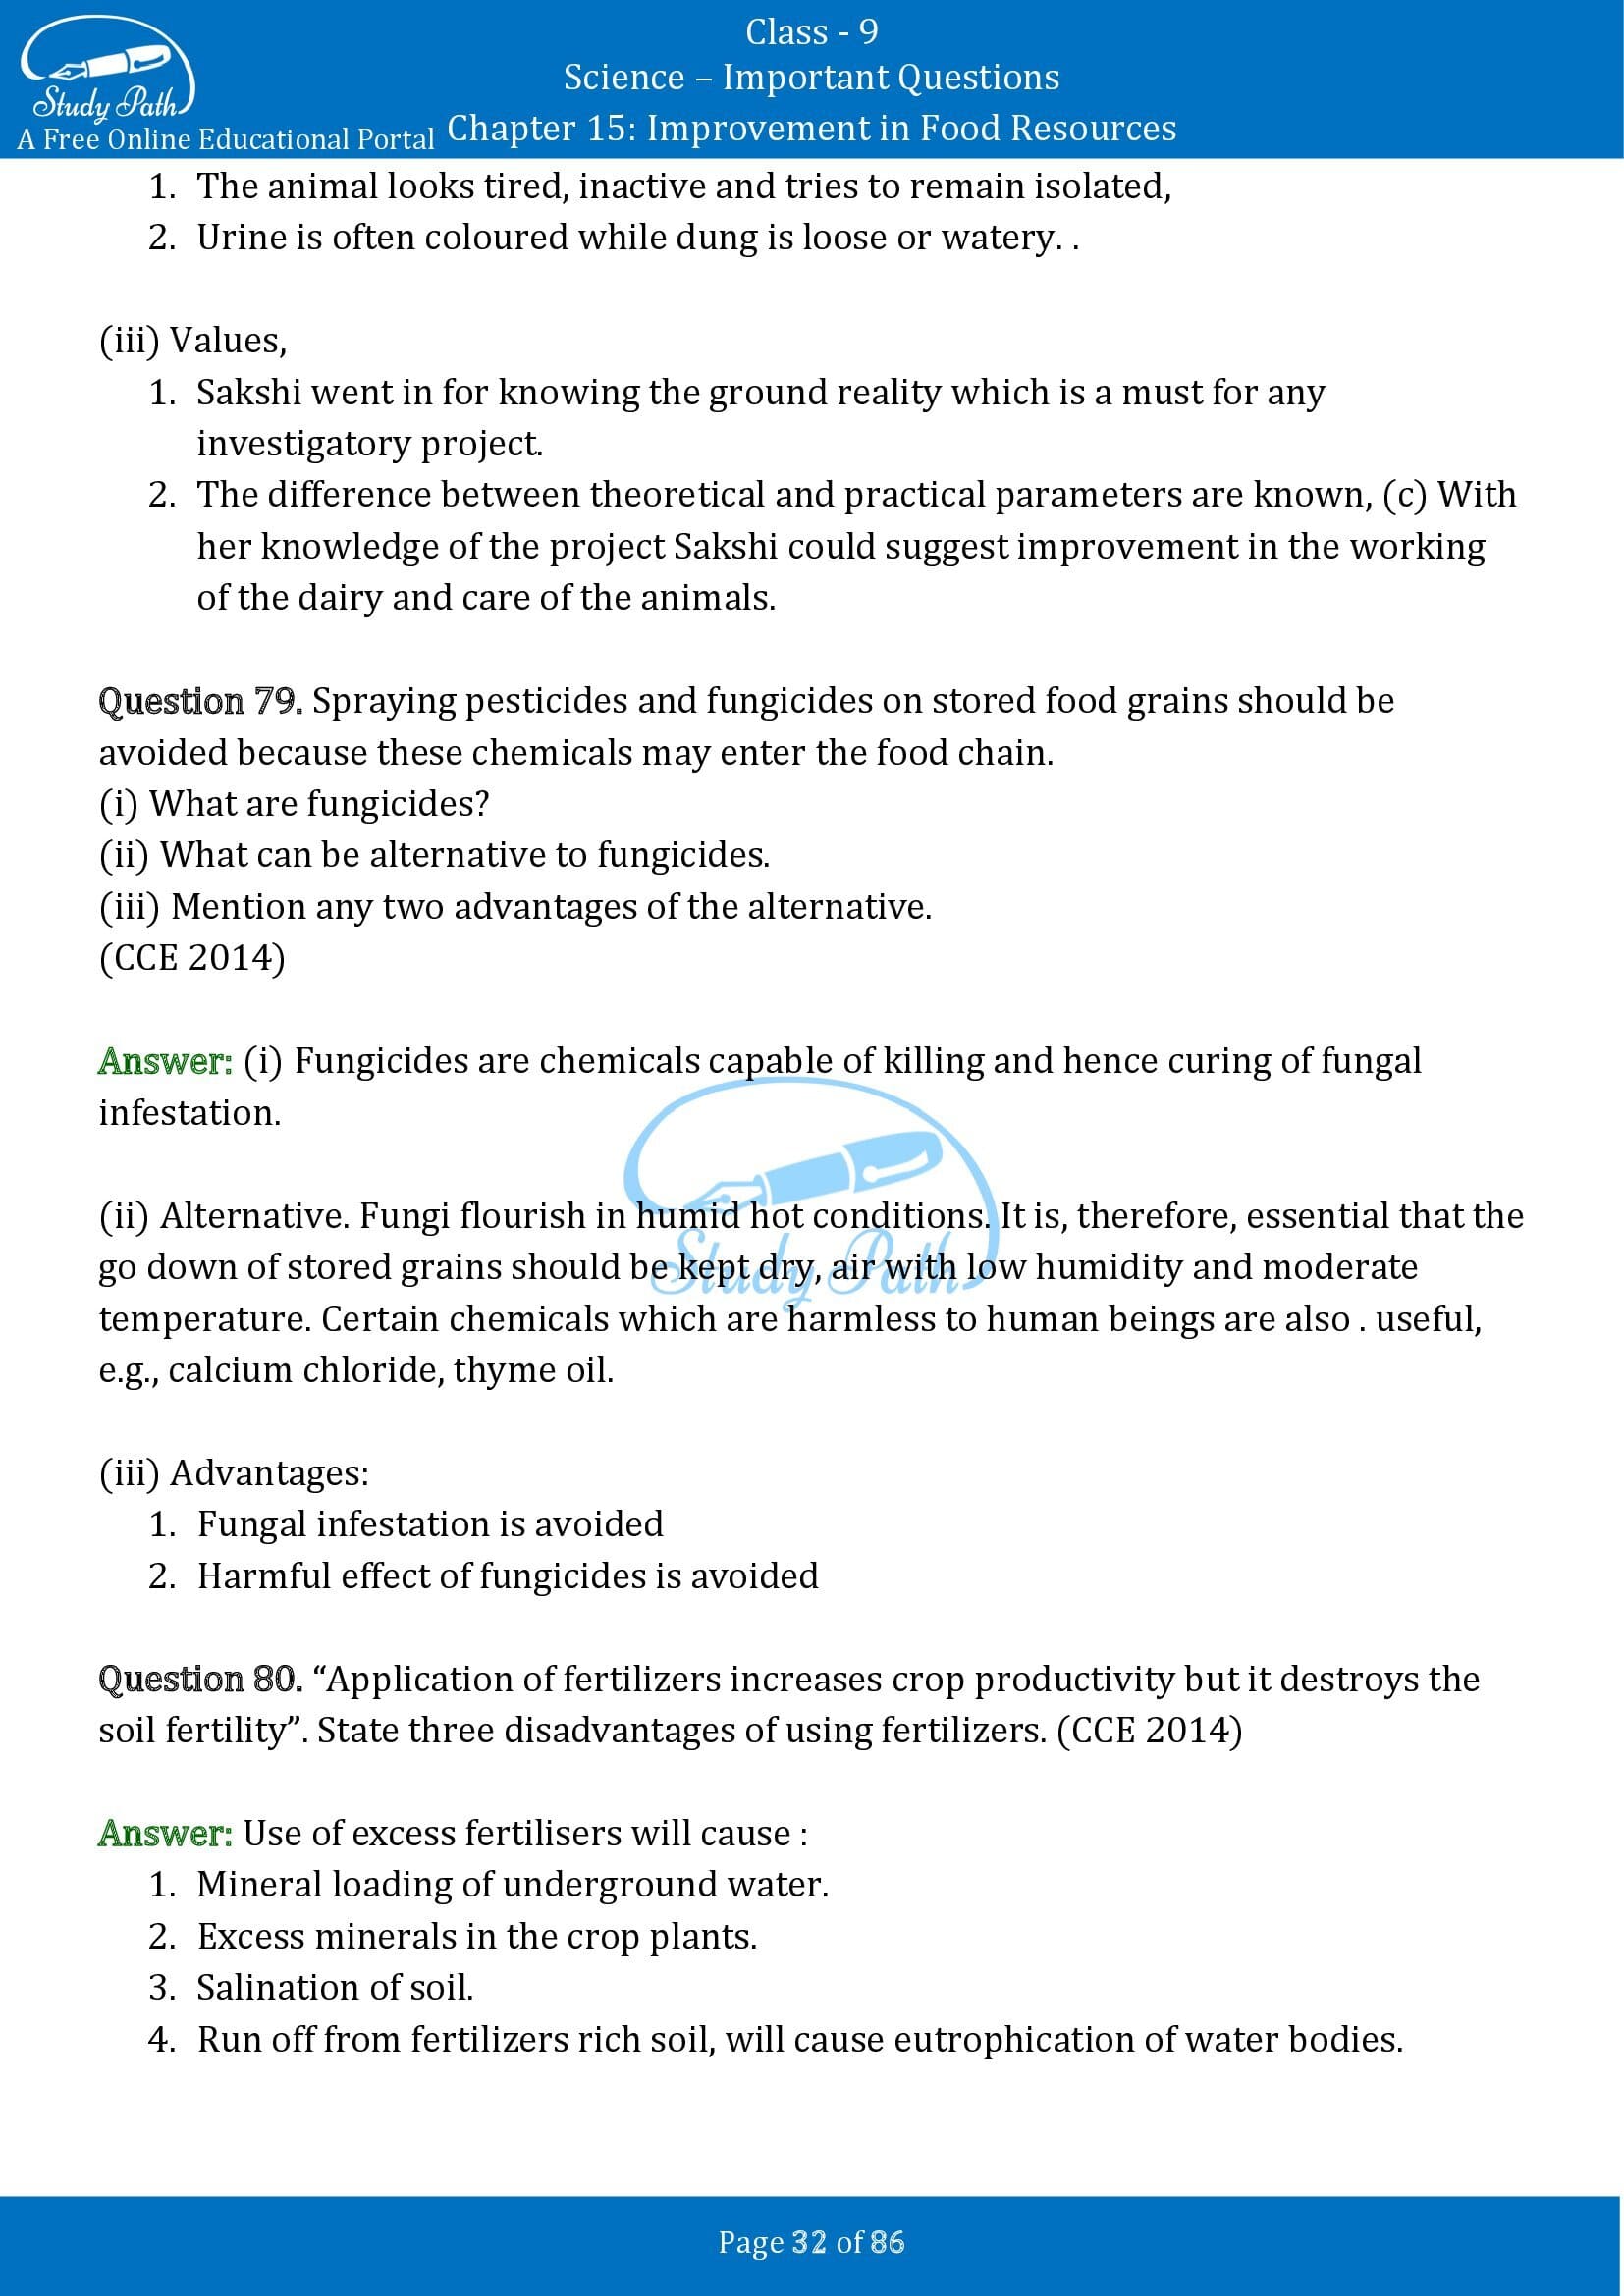 Important Questions for Class 9 Science Chapter 15 Improvement in Food Resources 00032